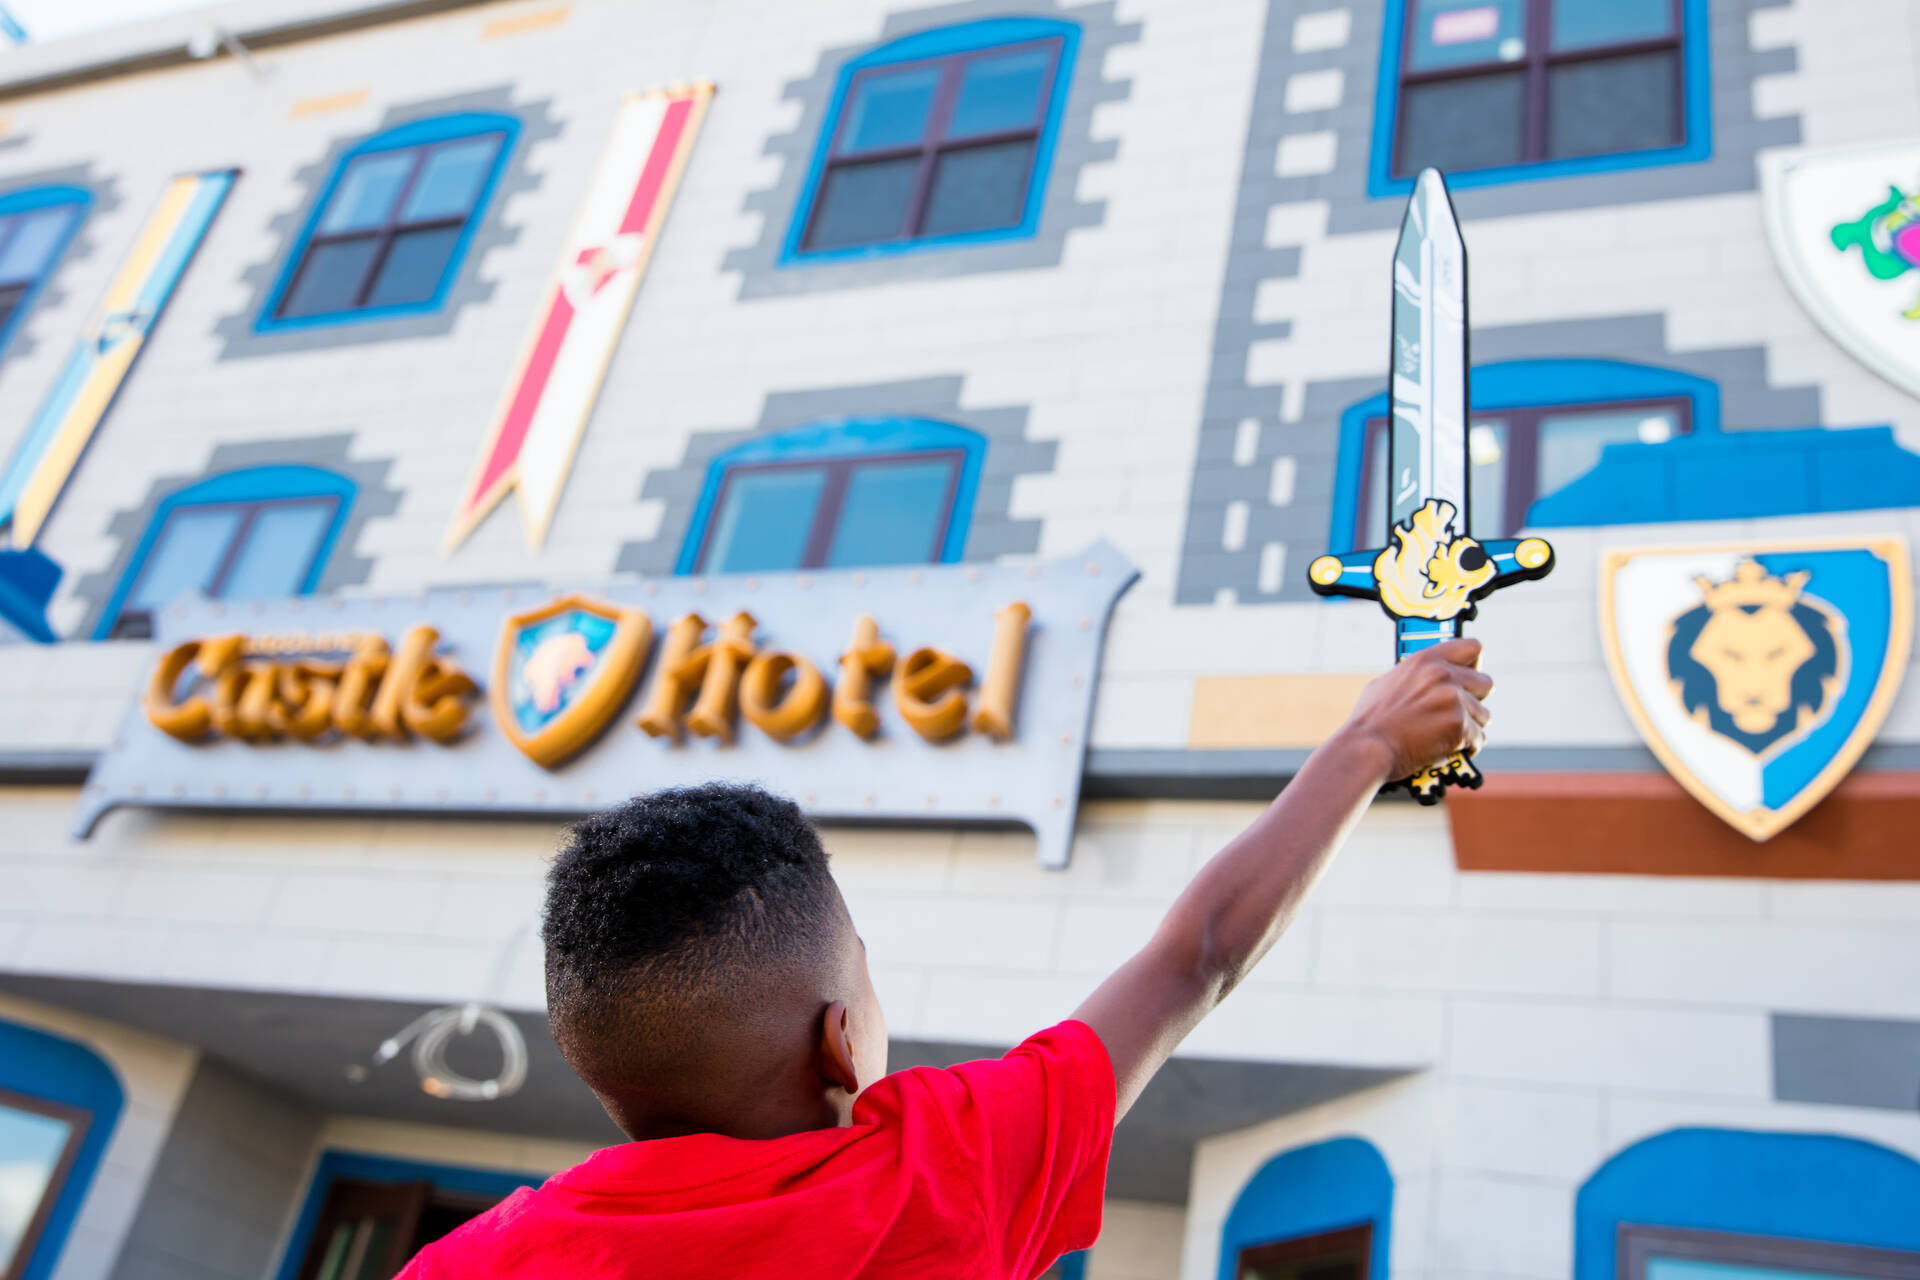 Kid strikes a heroic pose in front of the LEGOLAND Castle Hotel